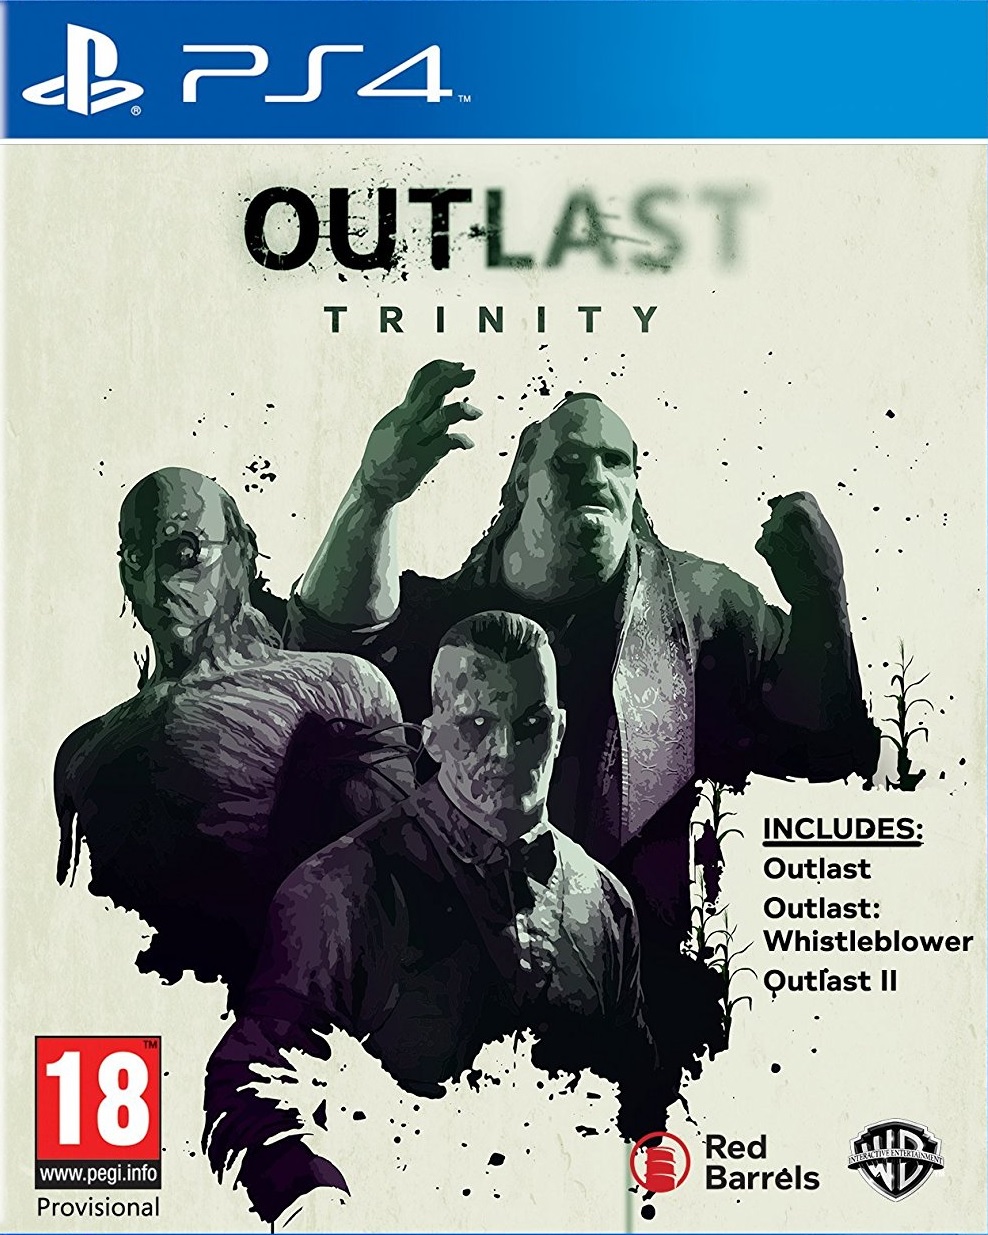 outlast trinity download free